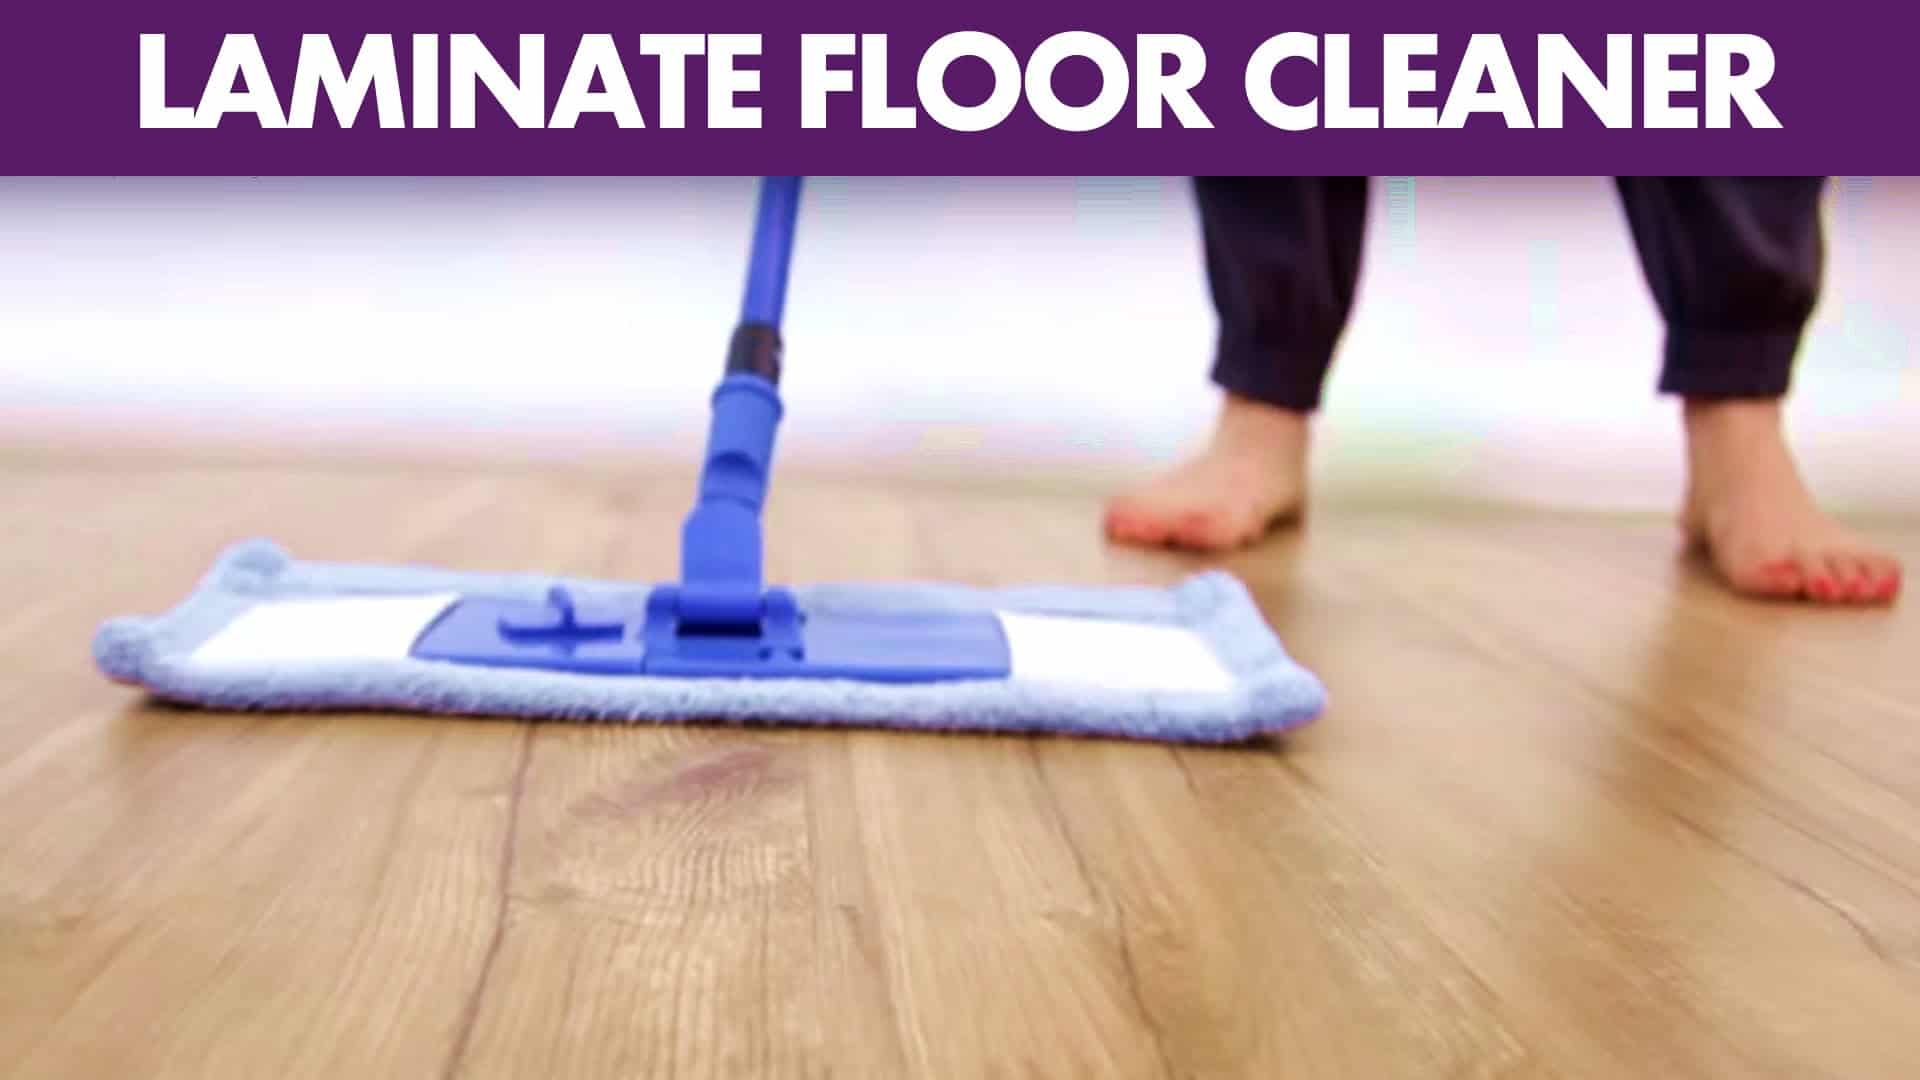 Laminate Floor Cleaner - Day 9 - 31 Days of DIY Cleaners - Clean My Space